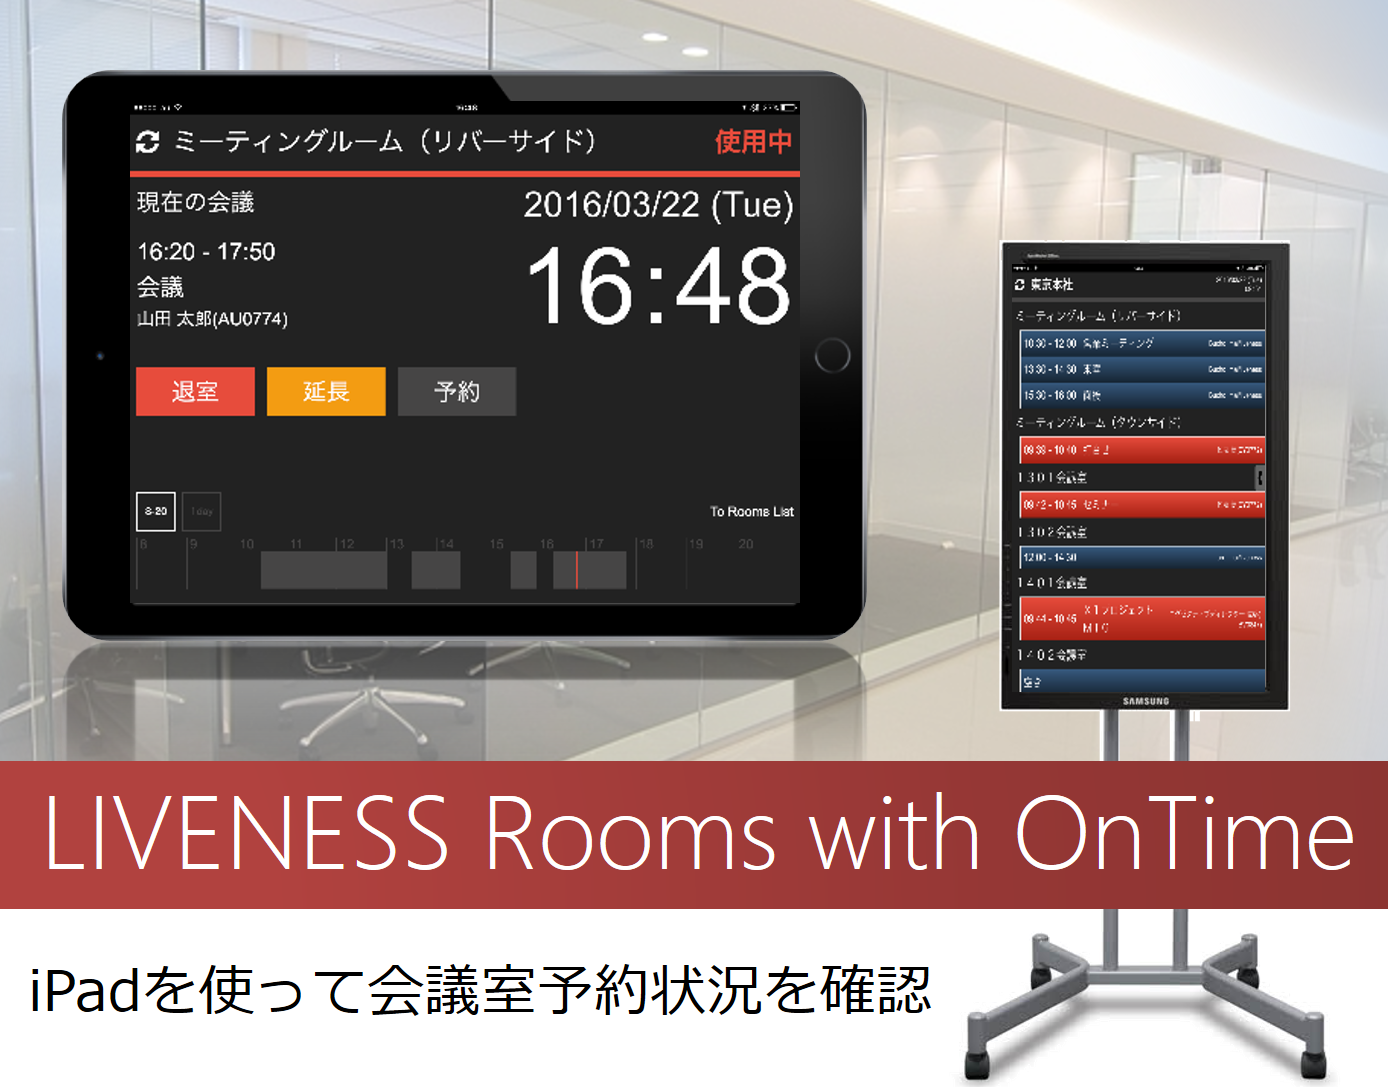 LIVENESS Rooms with OnTime